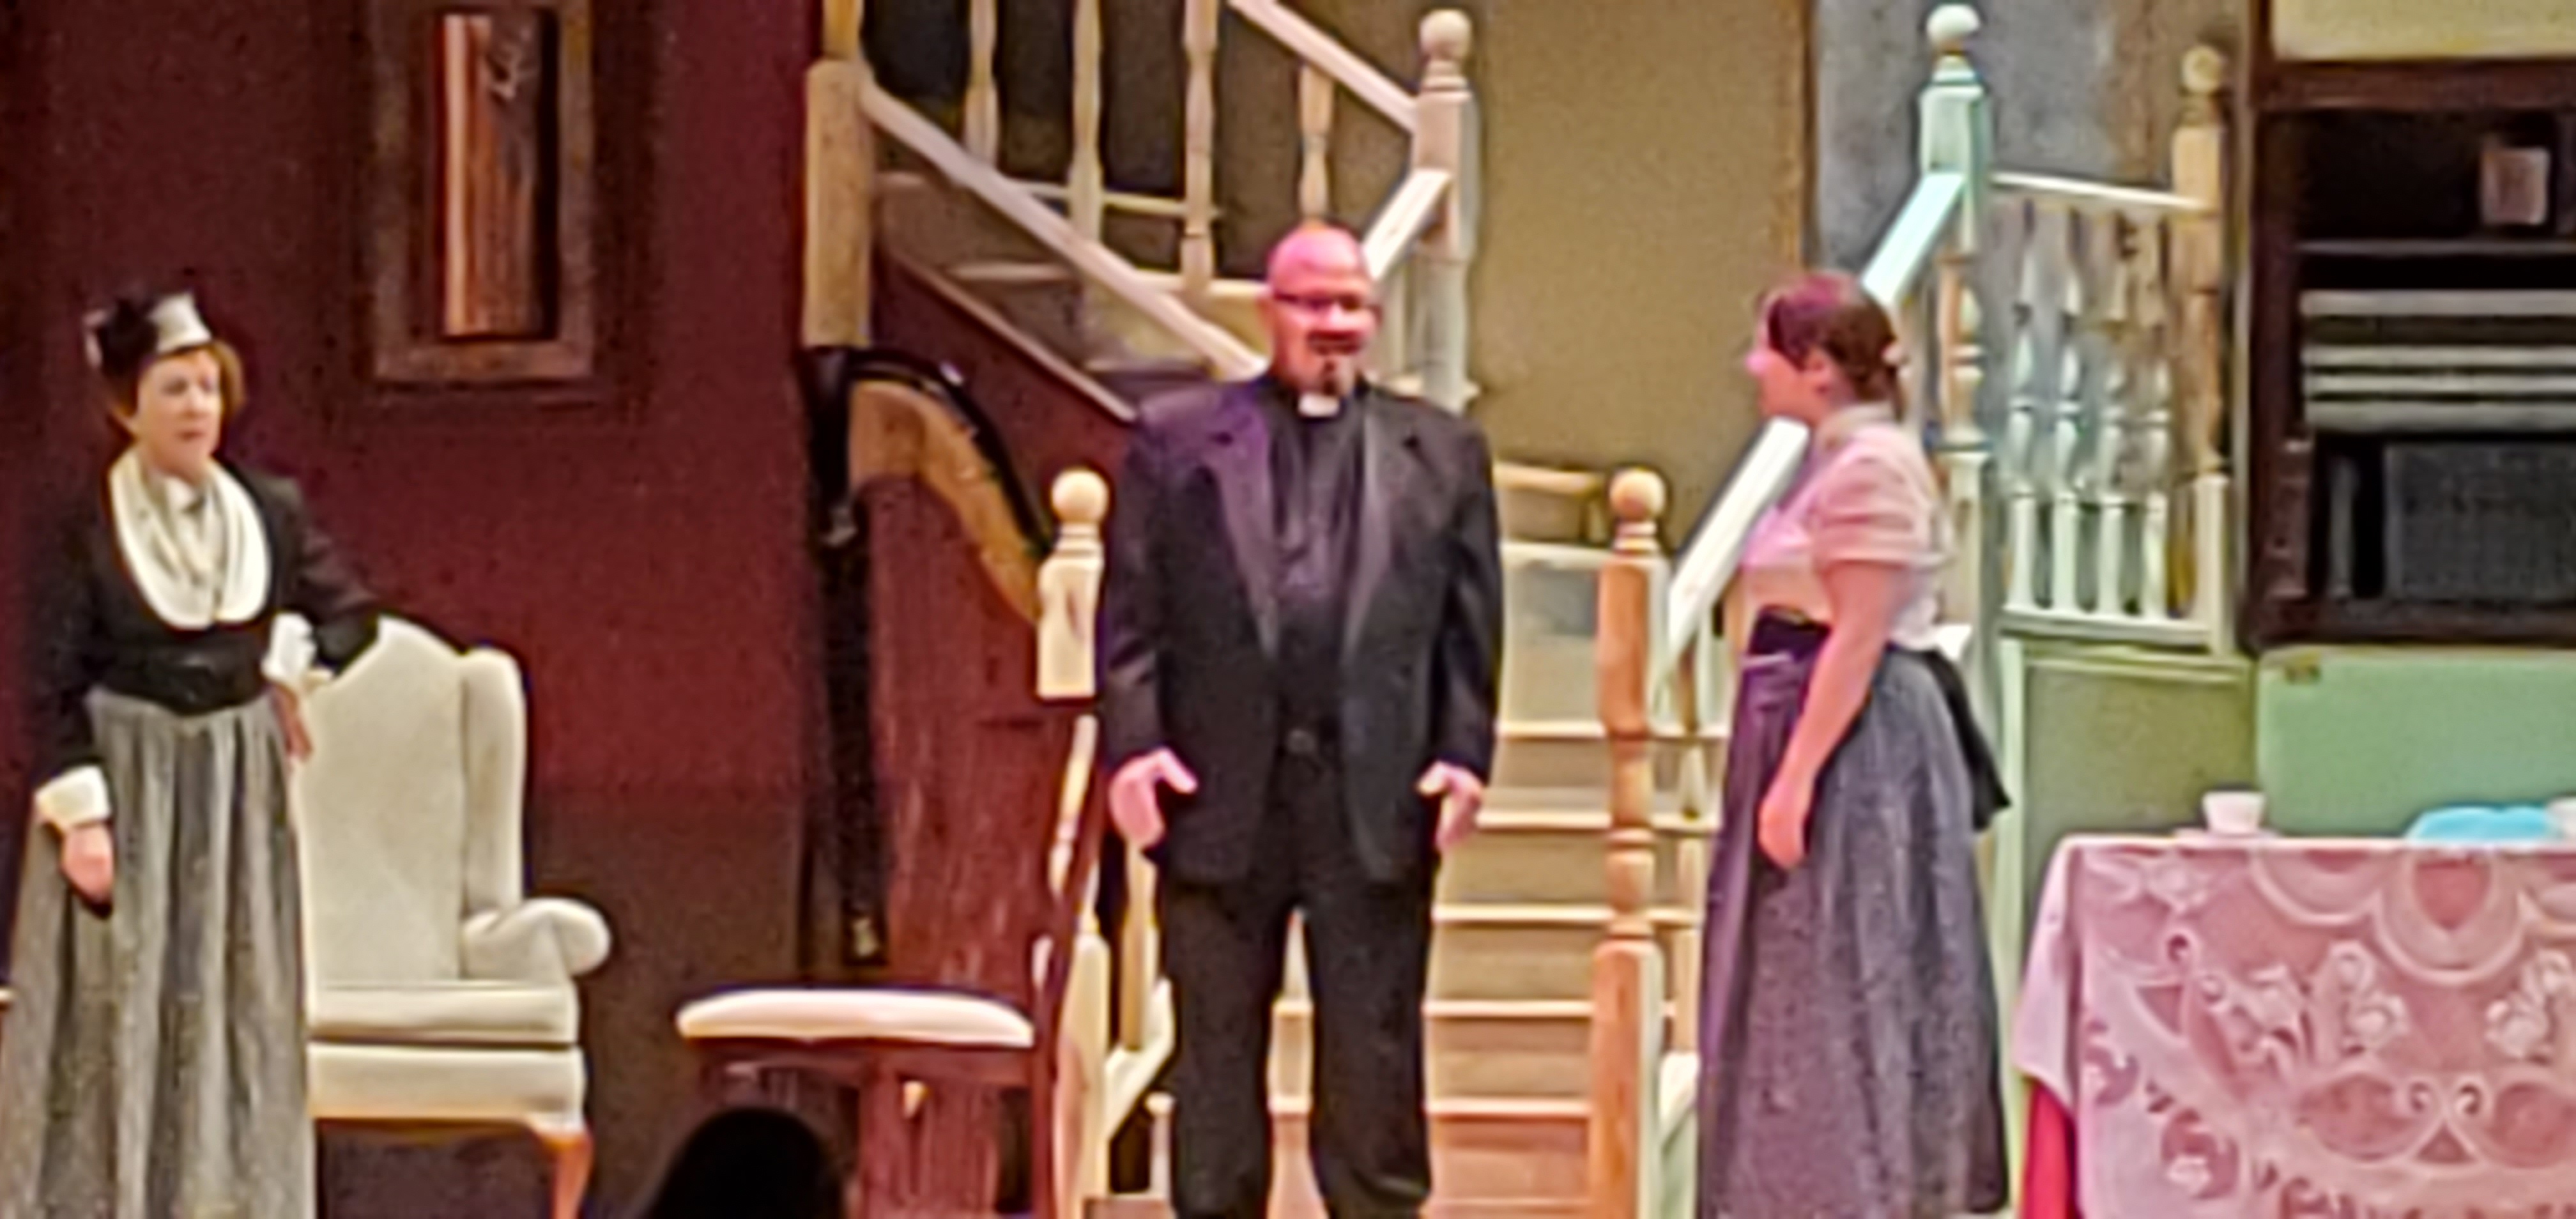 A woman in Victorian dress is to the left, the priest is in the middle and another woman in a white blouse and a long gray dress stands to the right.
       They stand in front of a staircase.